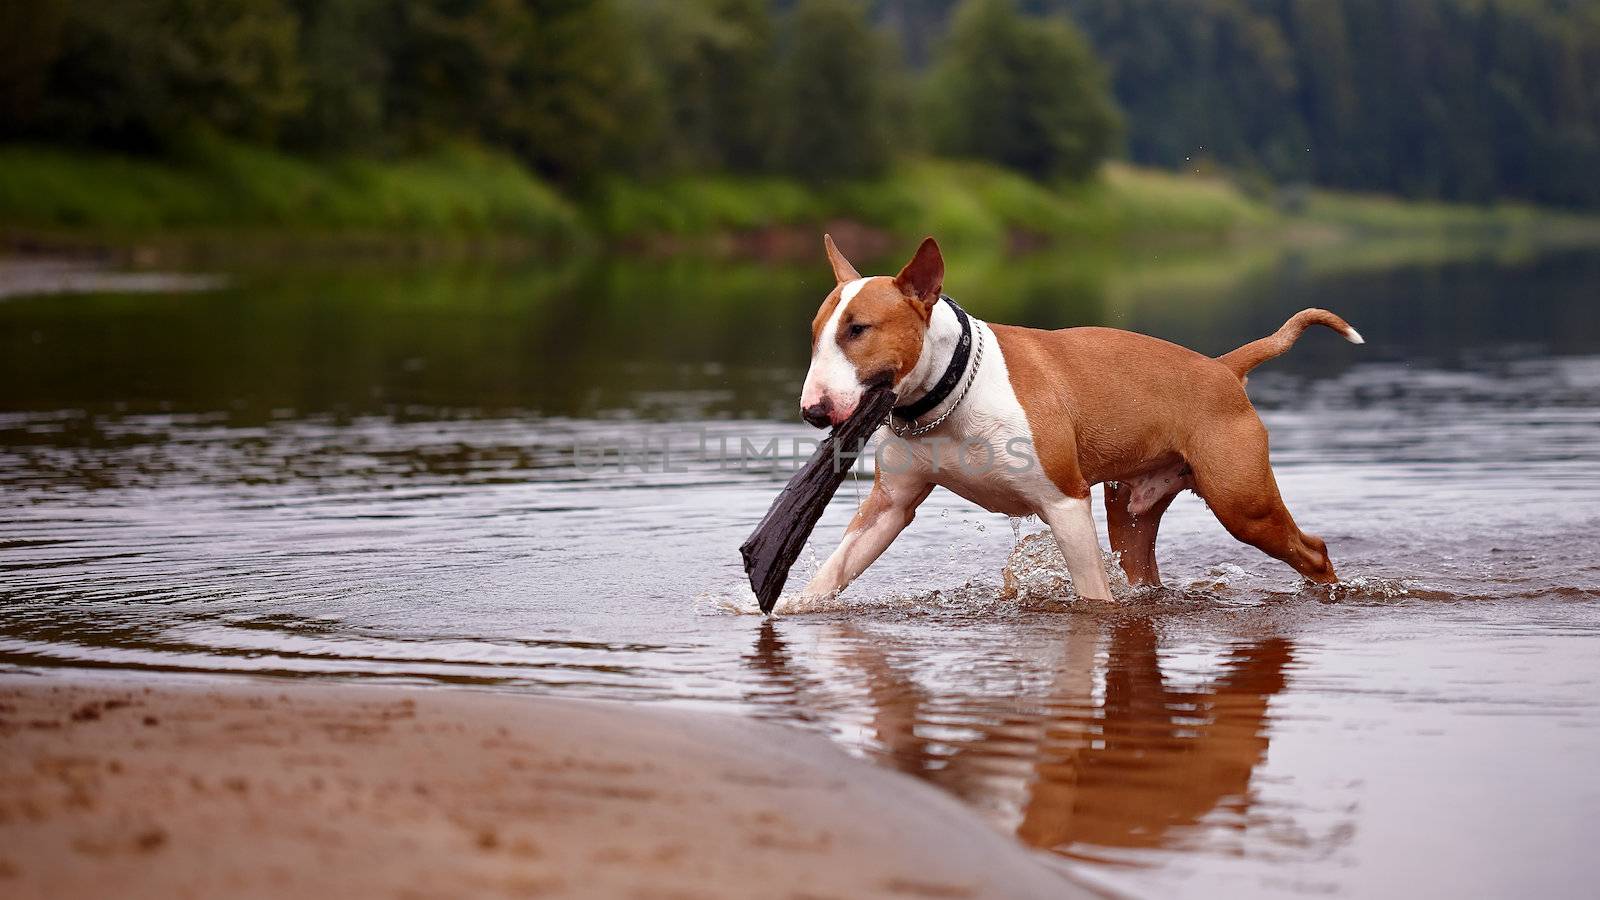 English bull terrier. Thoroughbred dog. Canine friend. Red dog. The bull terrier plays with a stick in the river